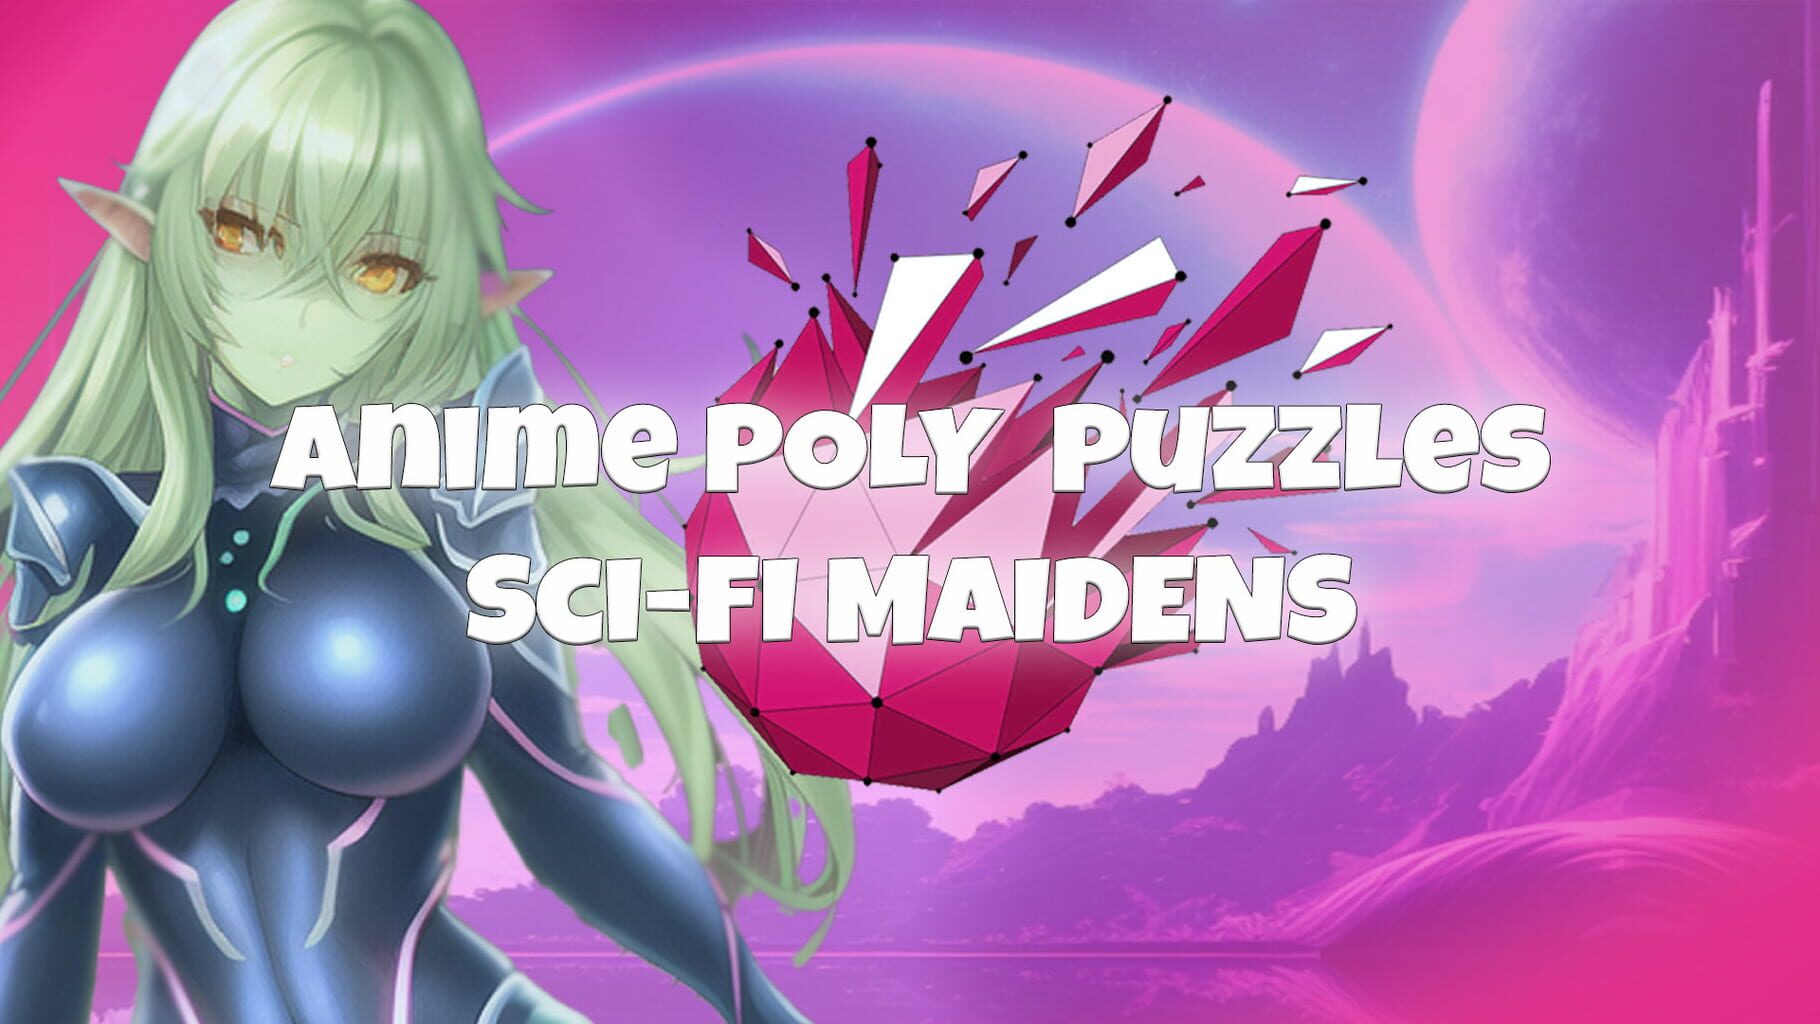 Anime Poly Puzzle: Sci-Fi Maidens artwork